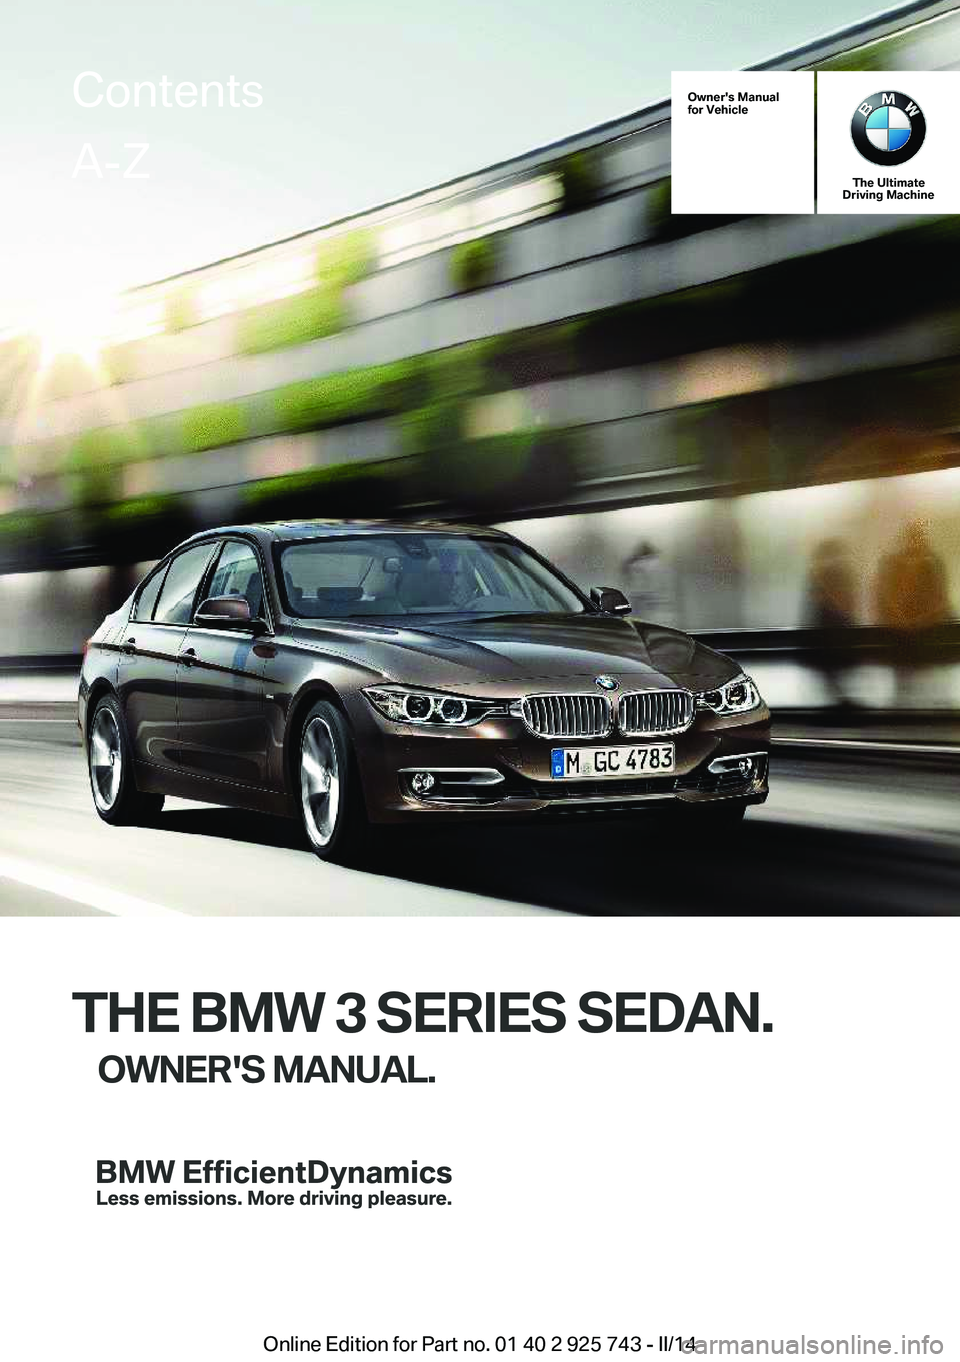 BMW 328I SEDAN 2014  Owners Manual Owner's Manual
for Vehicle
The Ultimate
Driving Machine
THE BMW 3 SERIES SEDAN.
OWNER'S MANUAL.
ContentsA-Z
Online Edition for Part no. 01 40 2 925 743 - II/14   